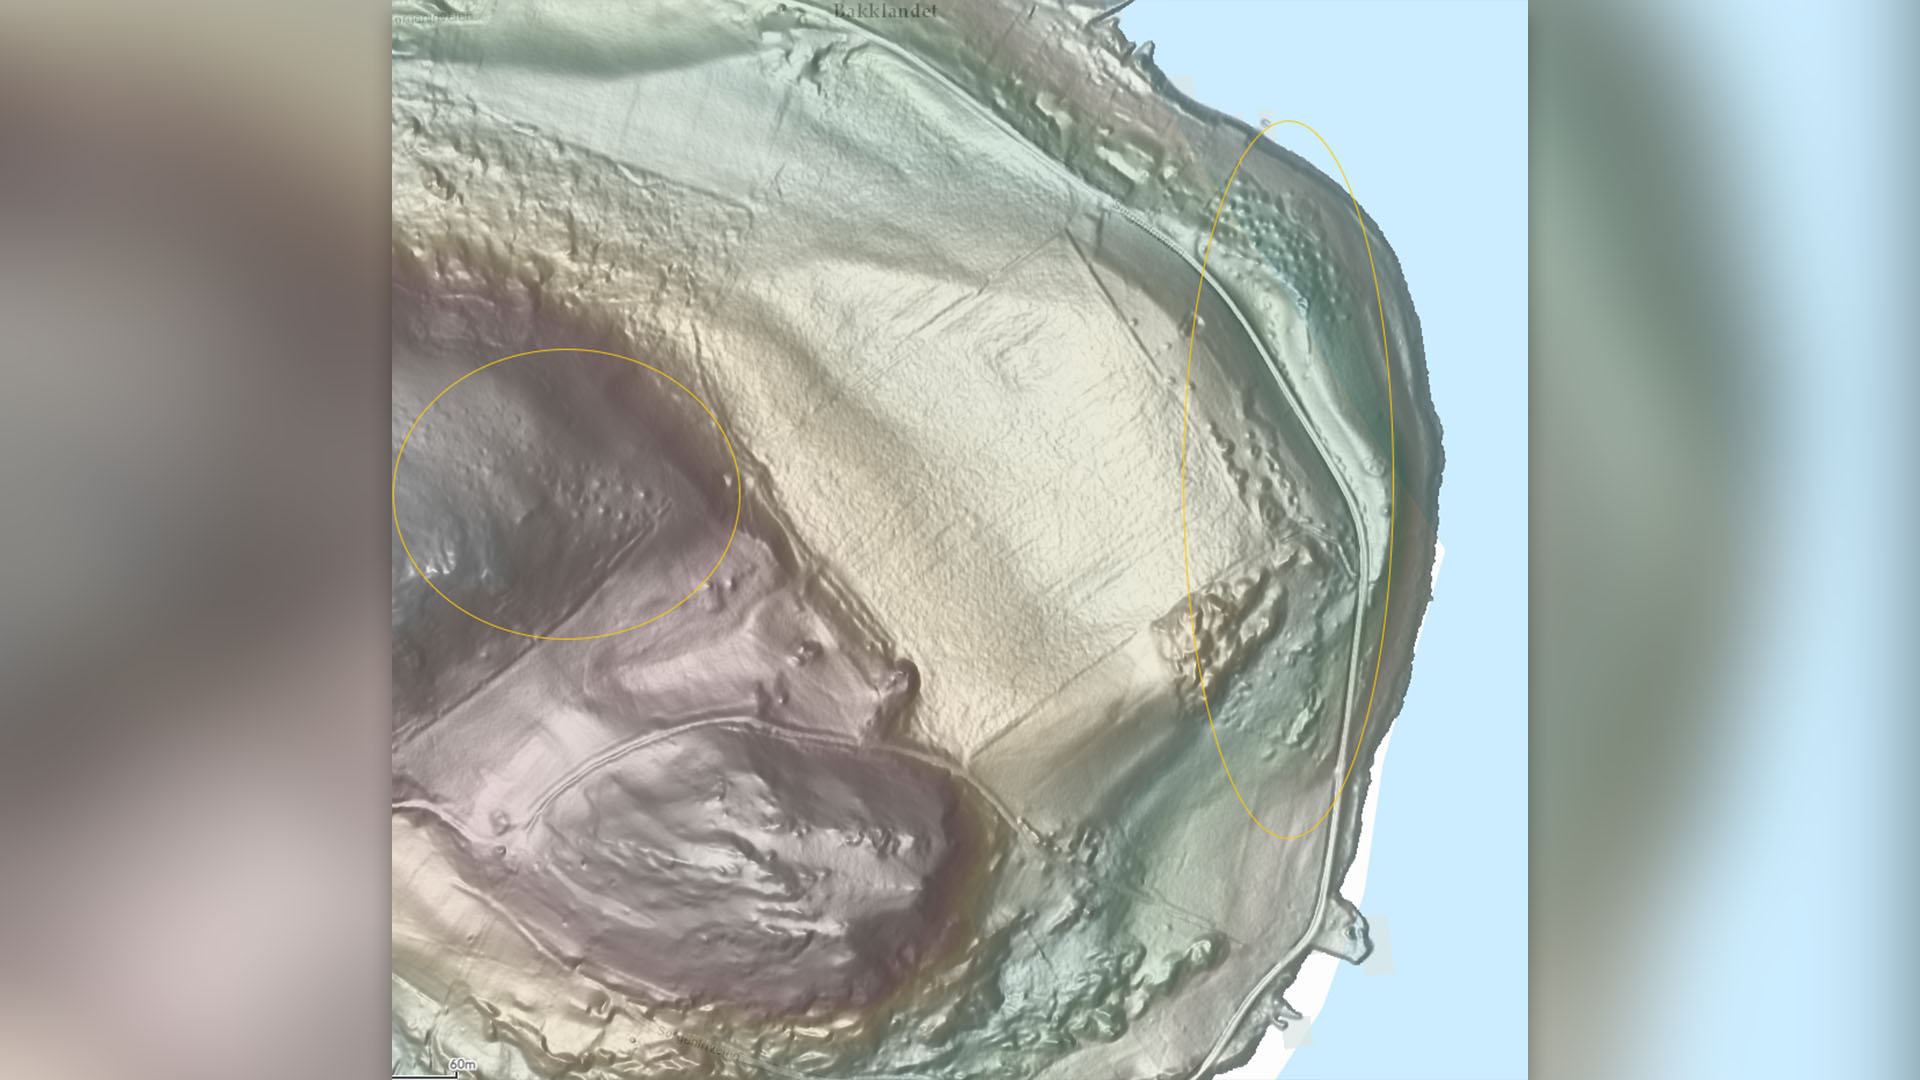 The aerial Lidar images also show burial mounds and what may be the remains of early settlements on Klosterøy, which indicate that the island was an important place in very ancient times.